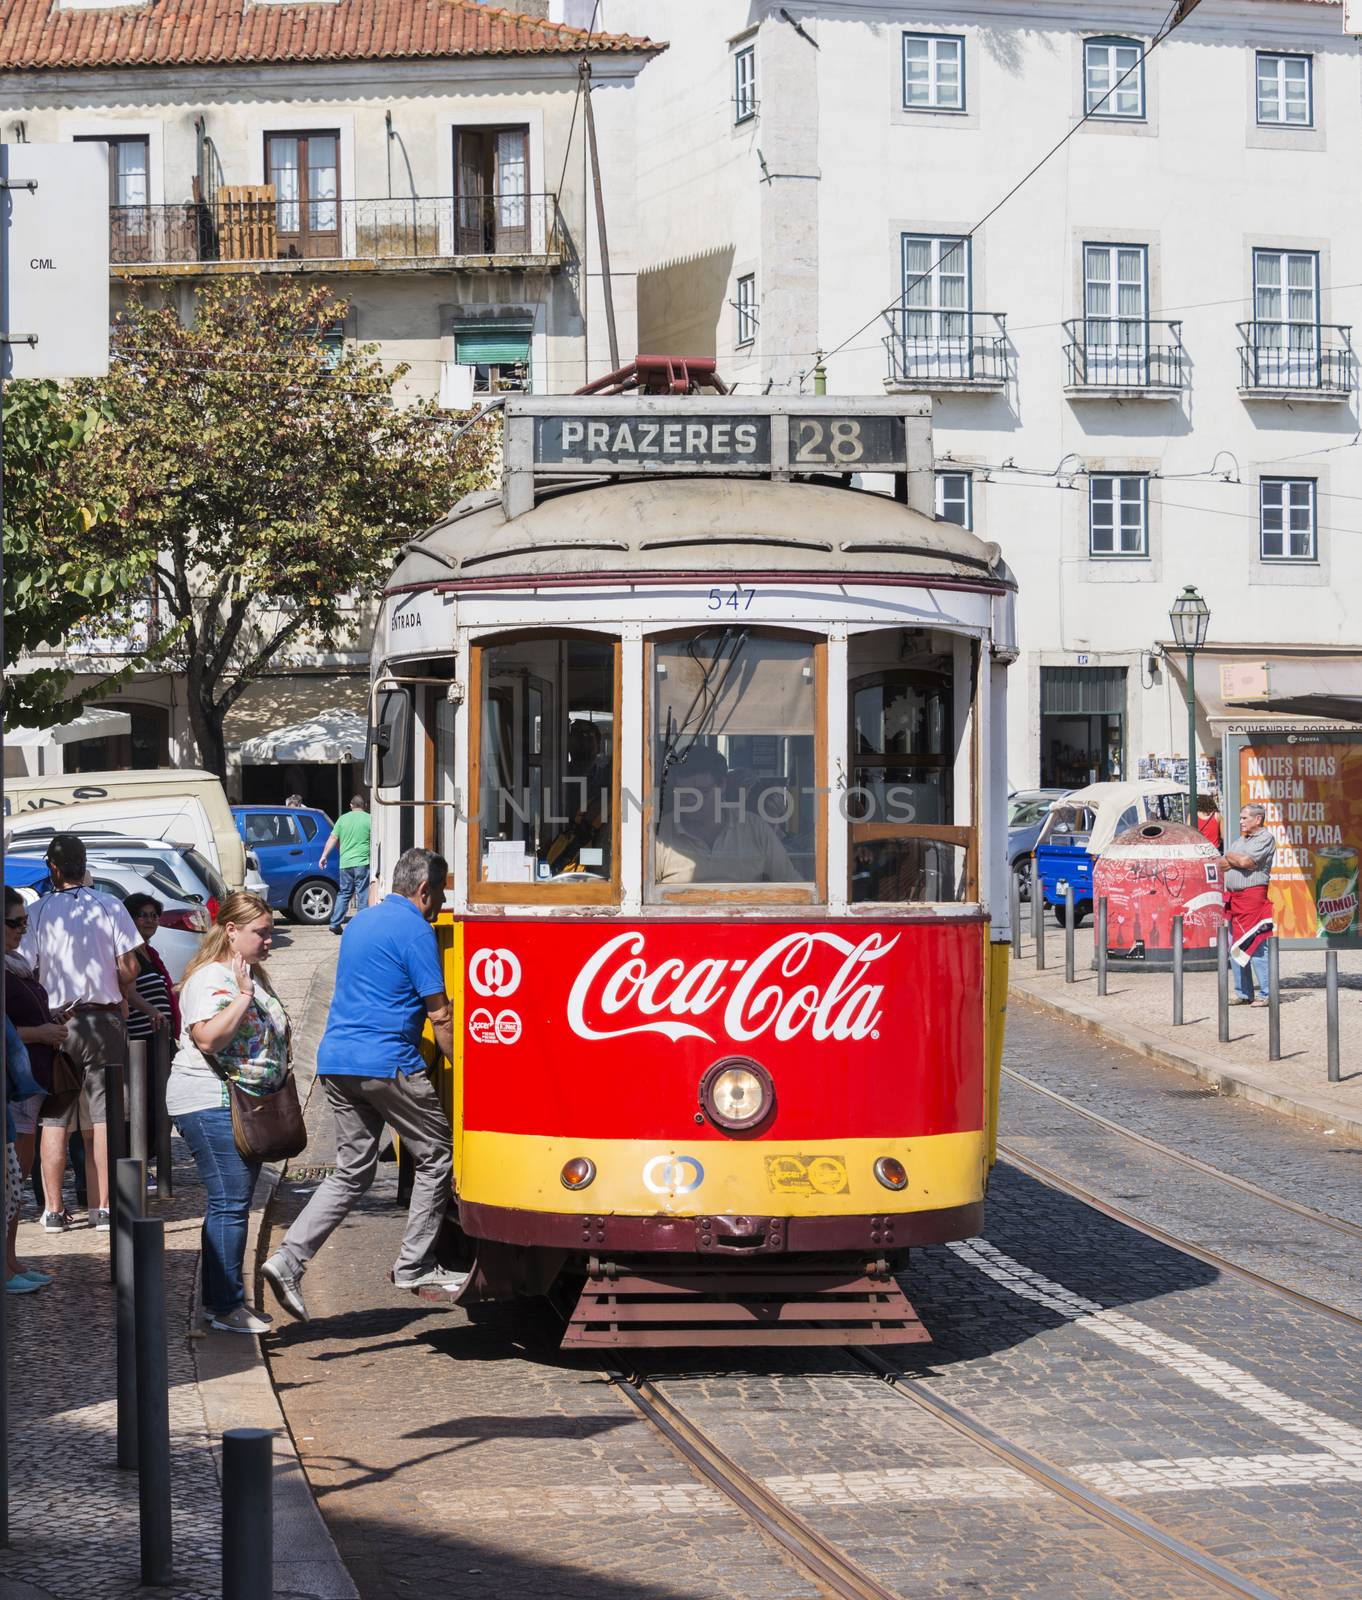 LISBON, PORTUGAL - SEPTEMBER 26: Unidentified people getting on the Yellow tram  goes by the street of Lisbon city center on September 26, 2015. Lisbon is a capital and must famous city of Portugal